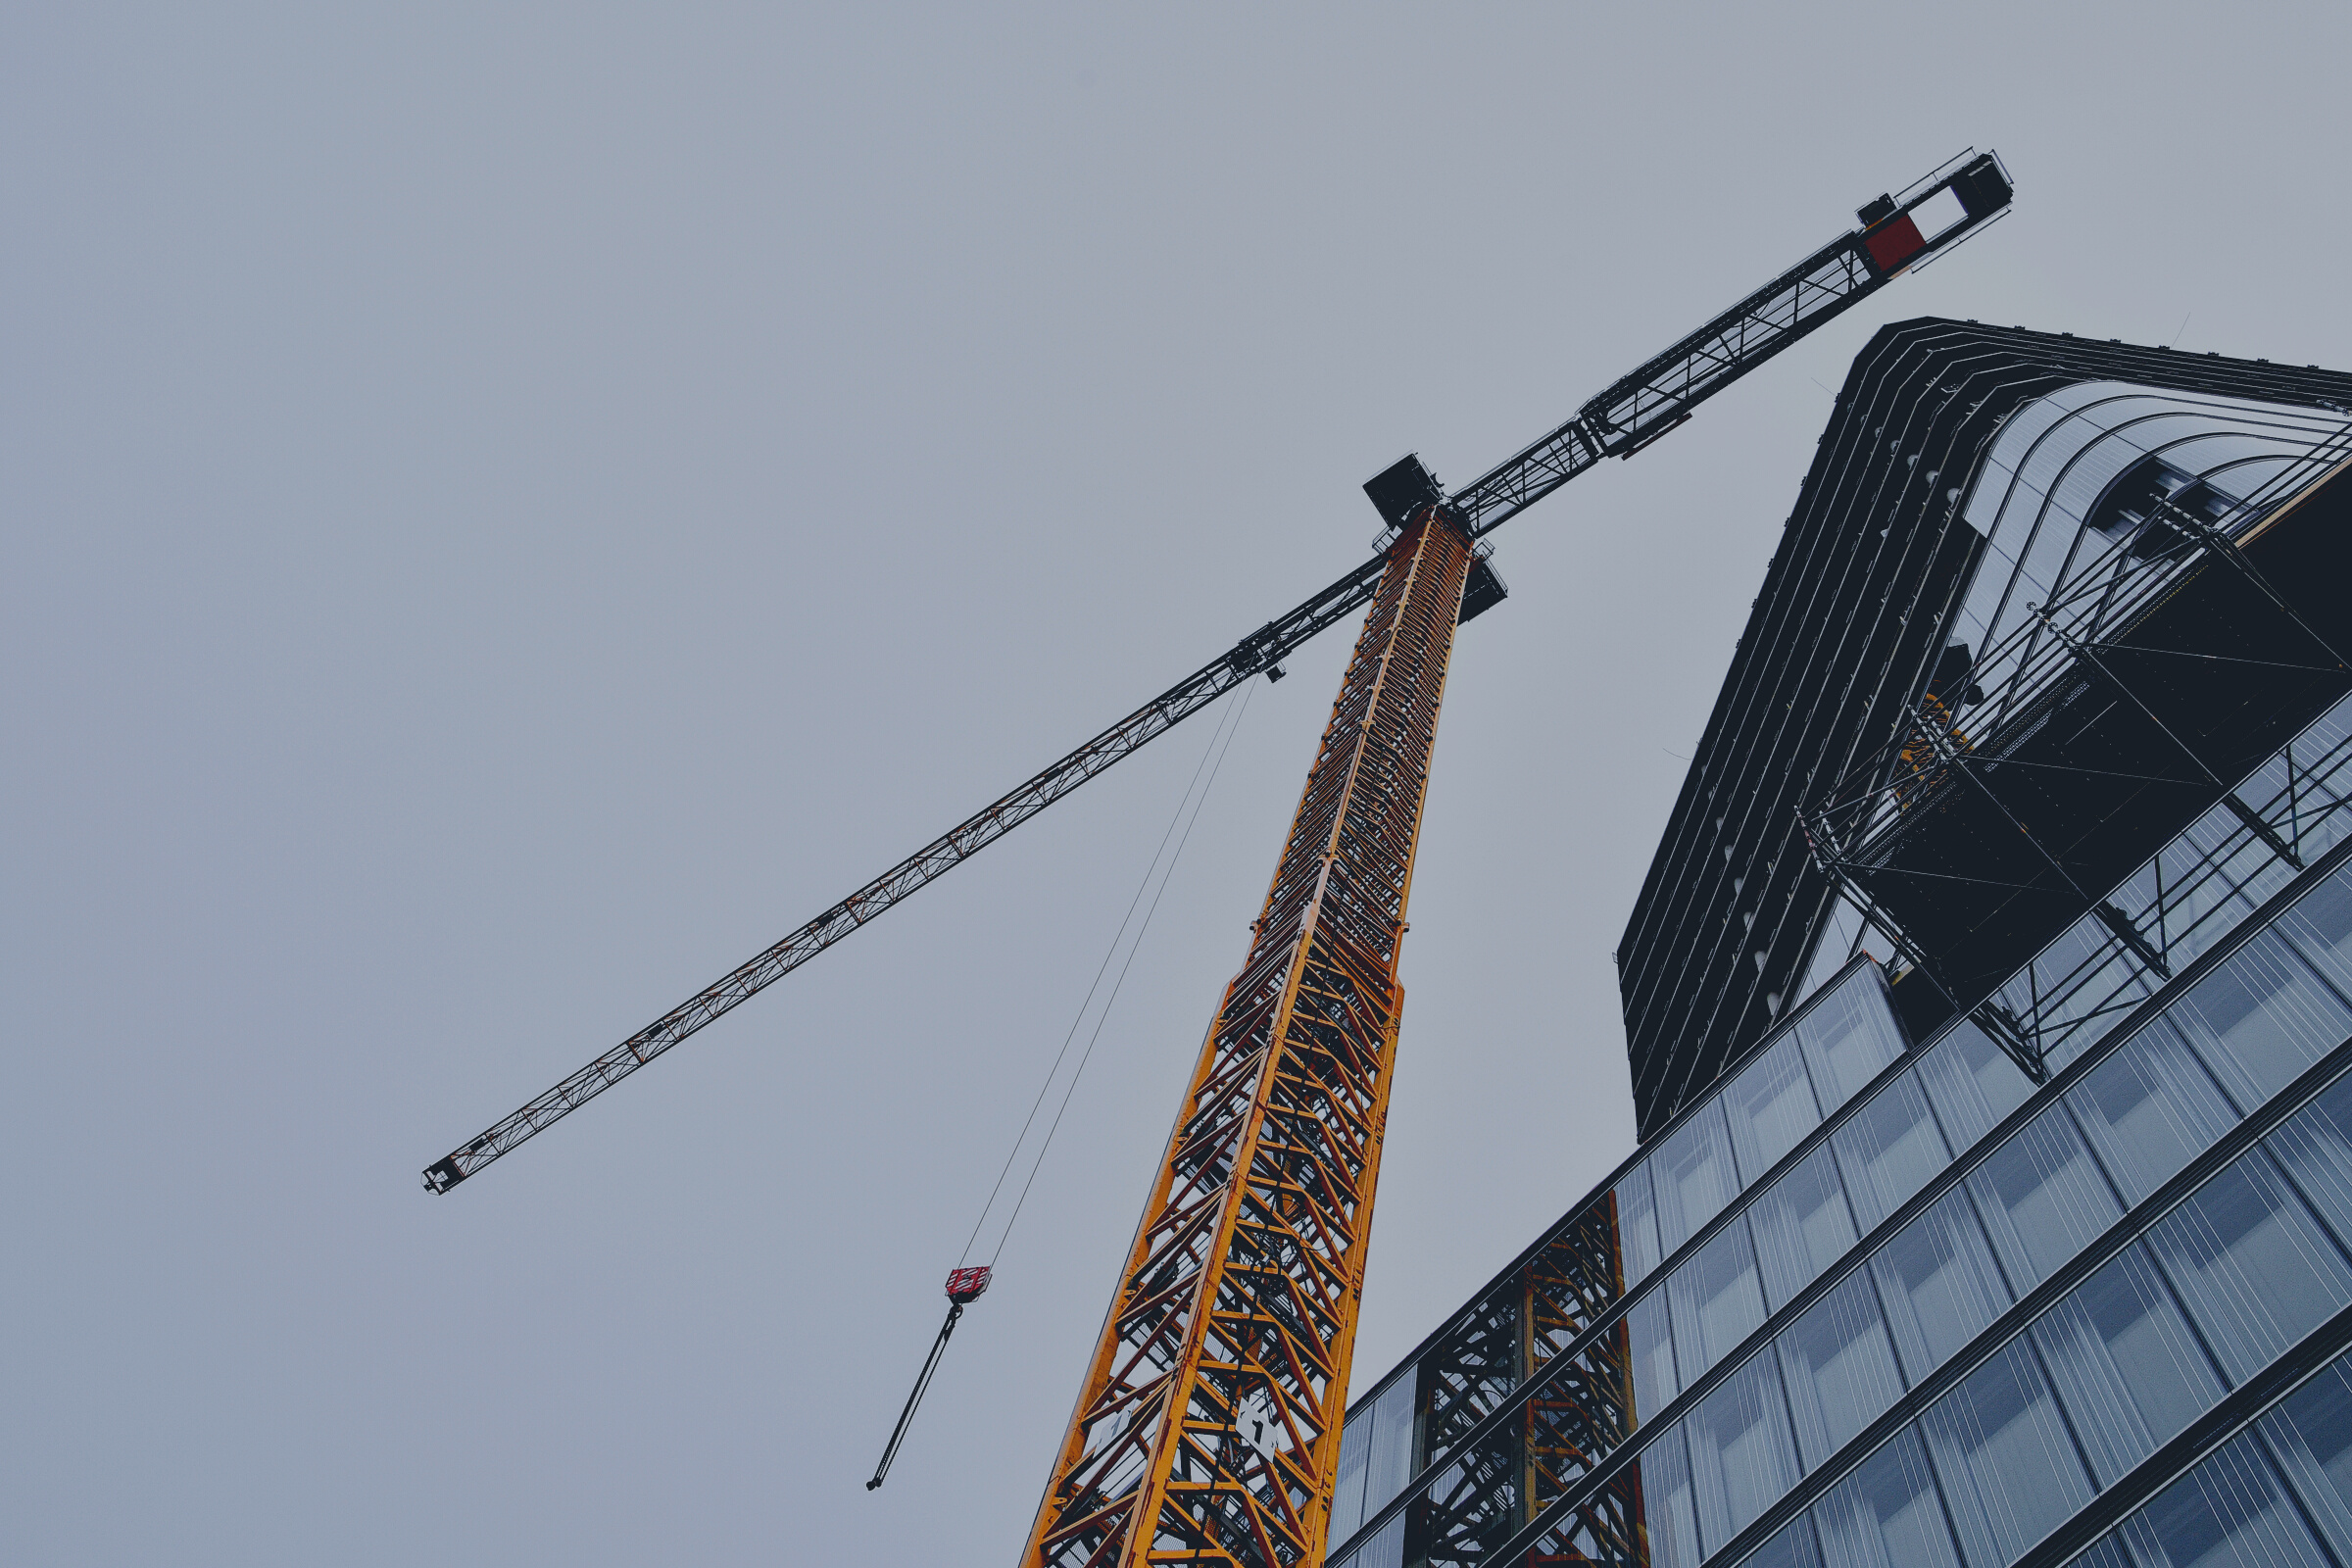 Low Angle Shot of a Tower Crane